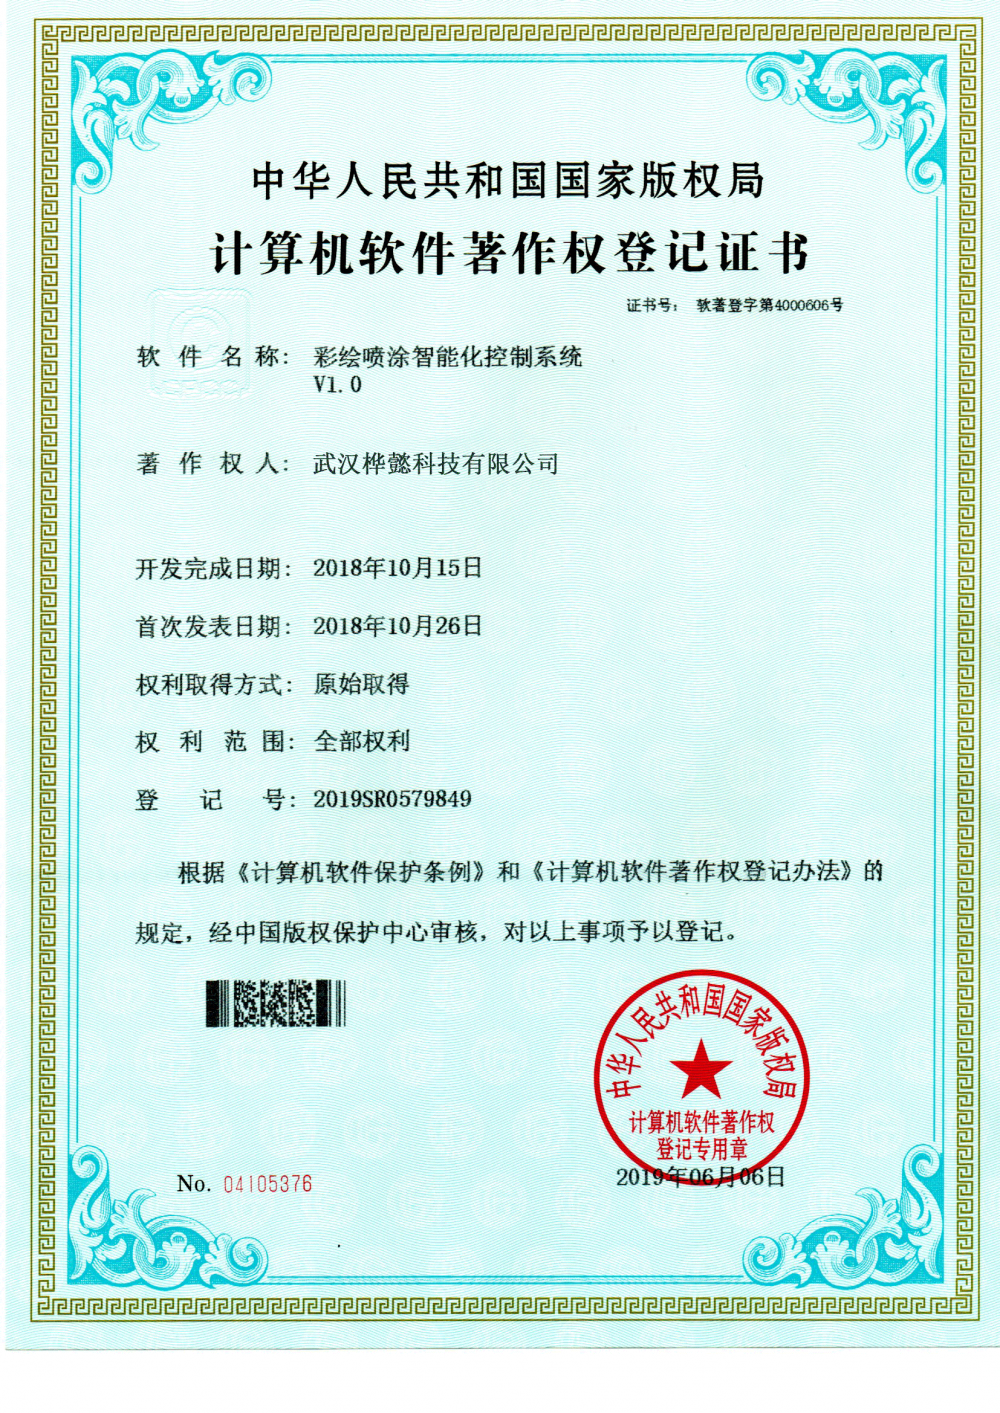 Certificate of registration for painting control System